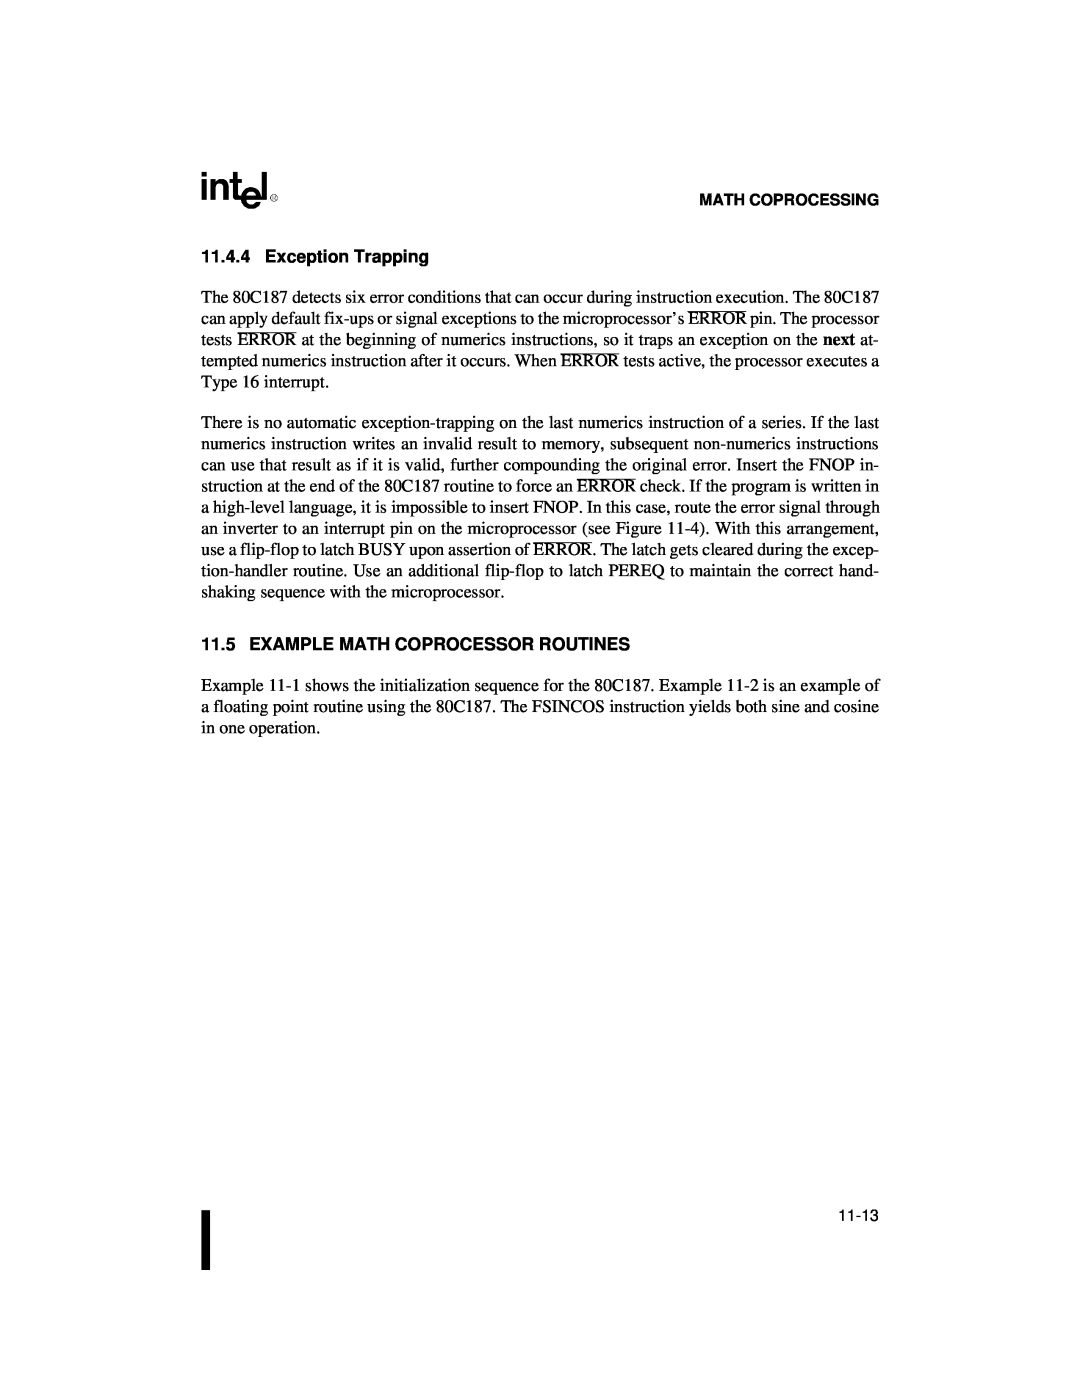 Intel 80C188XL, 80C186XL user manual Exception Trapping, Example Math Coprocessor Routines 